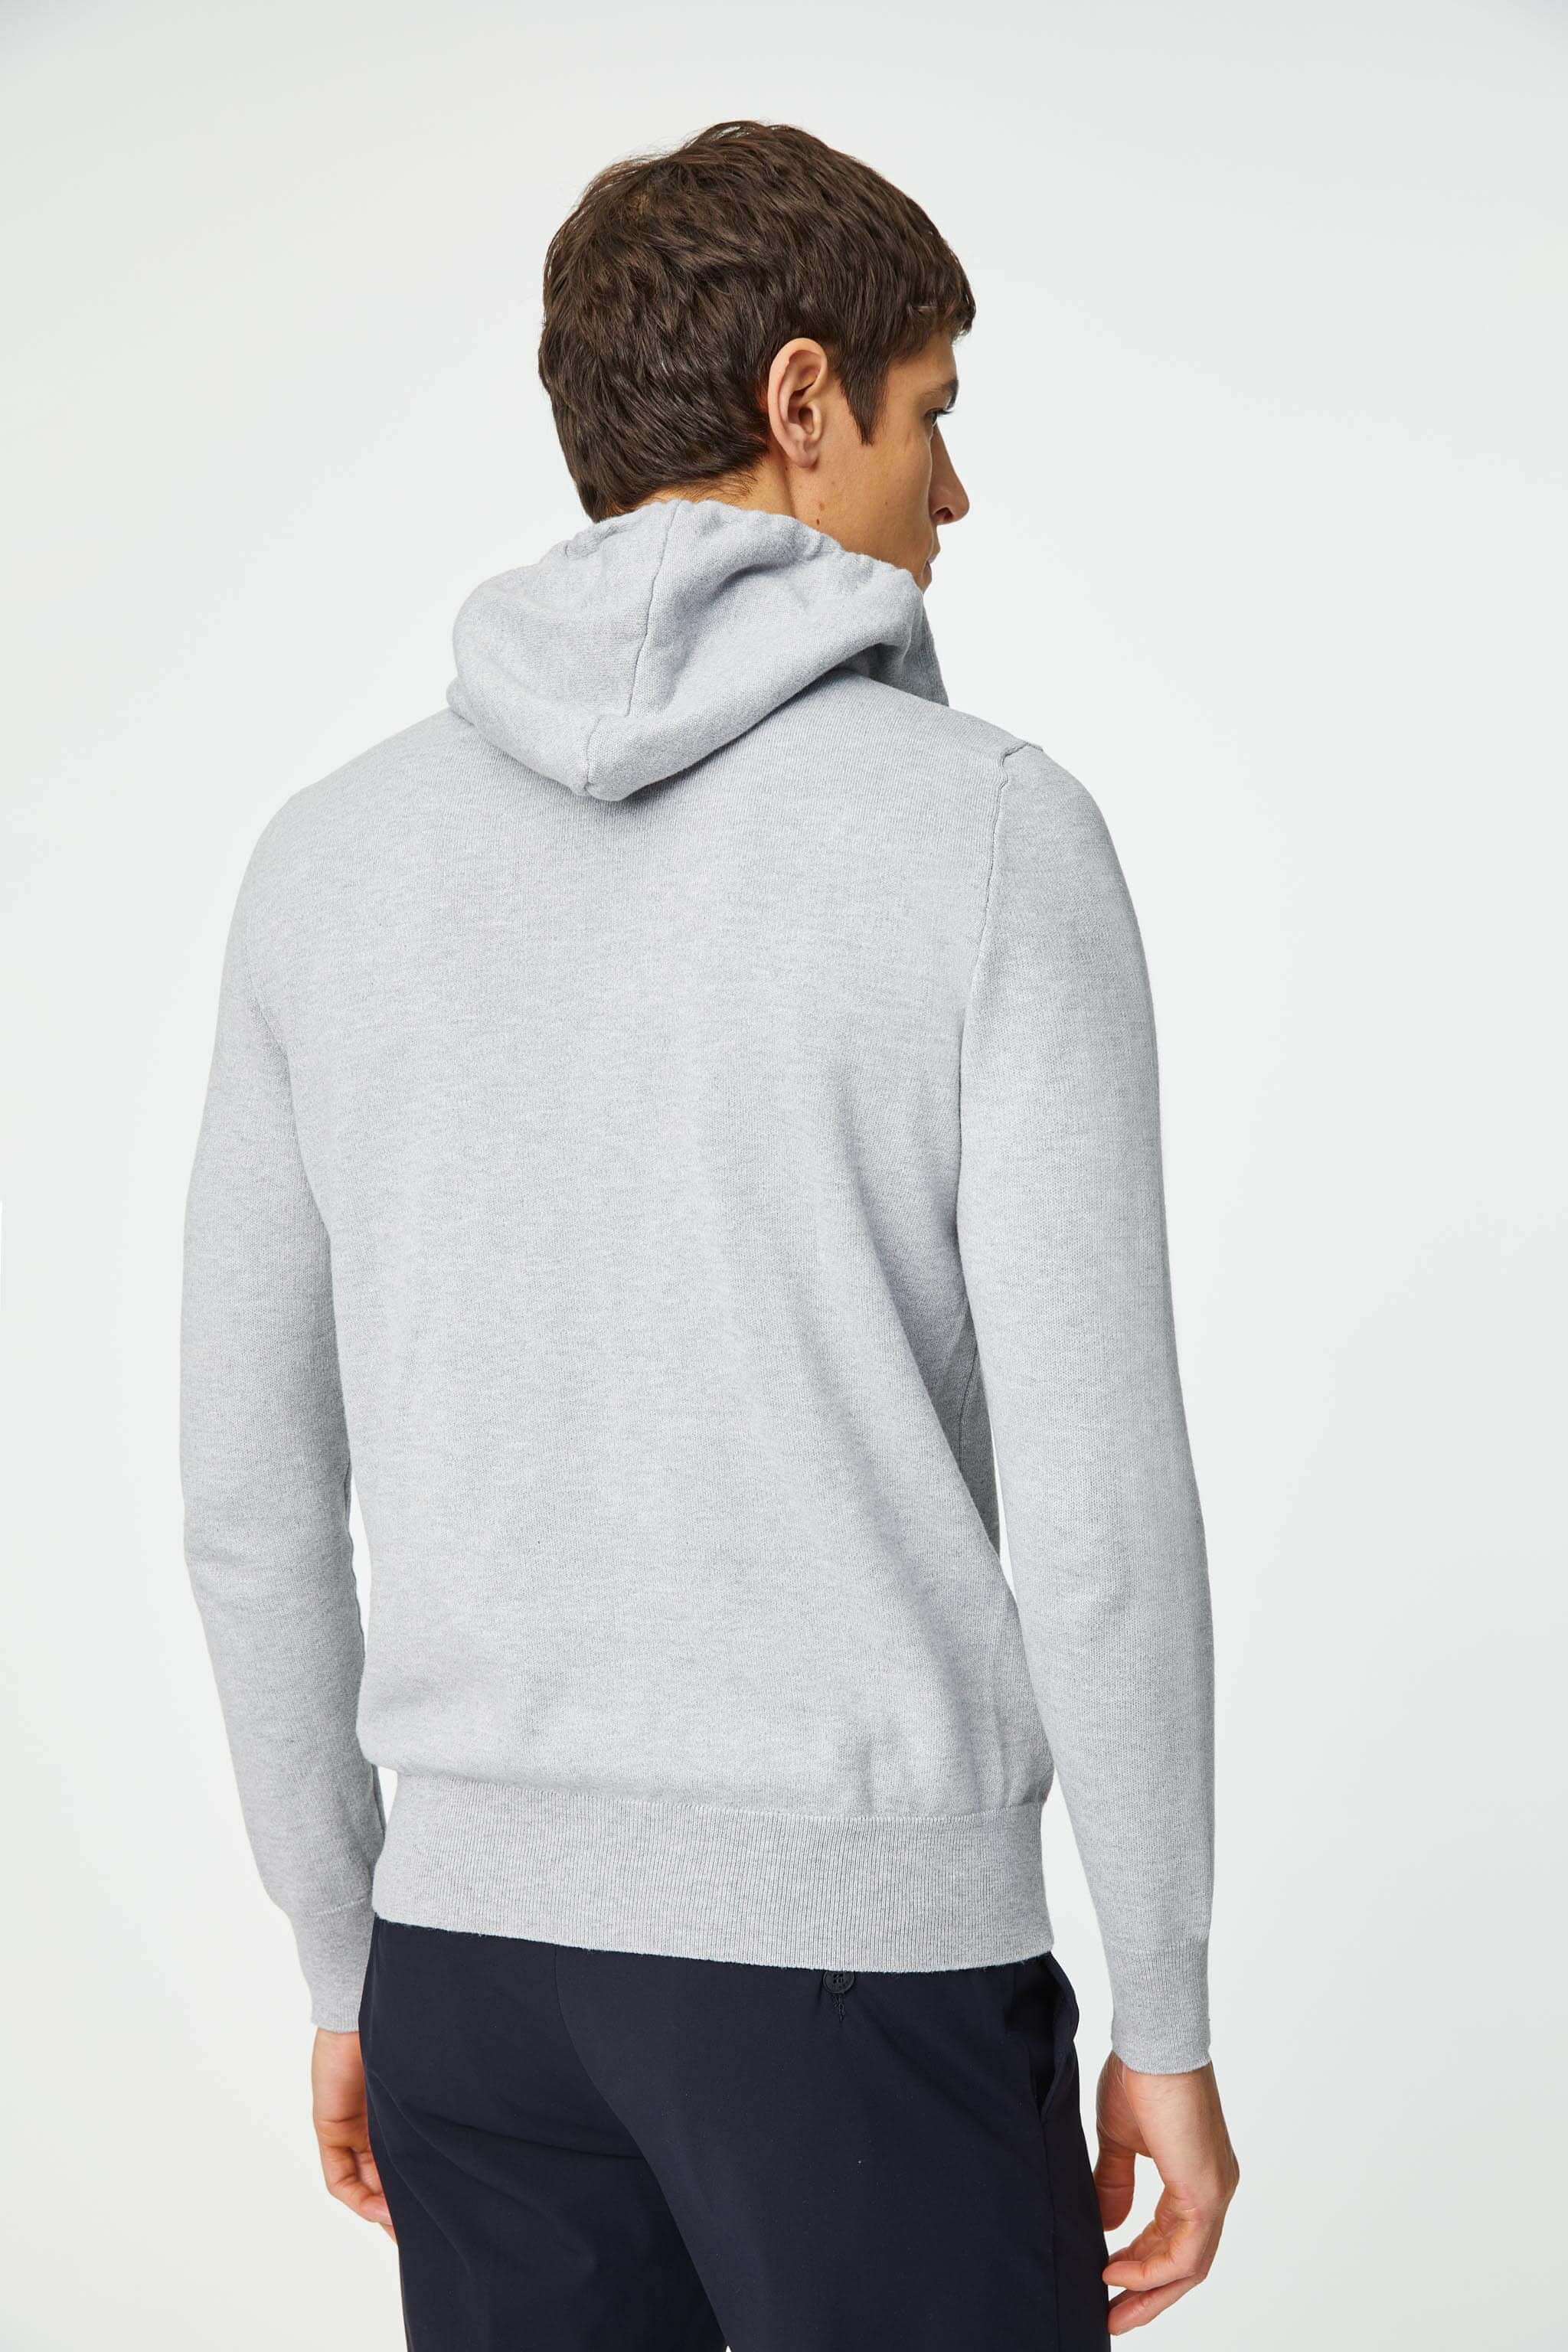 Cotton knit hoodie in gray